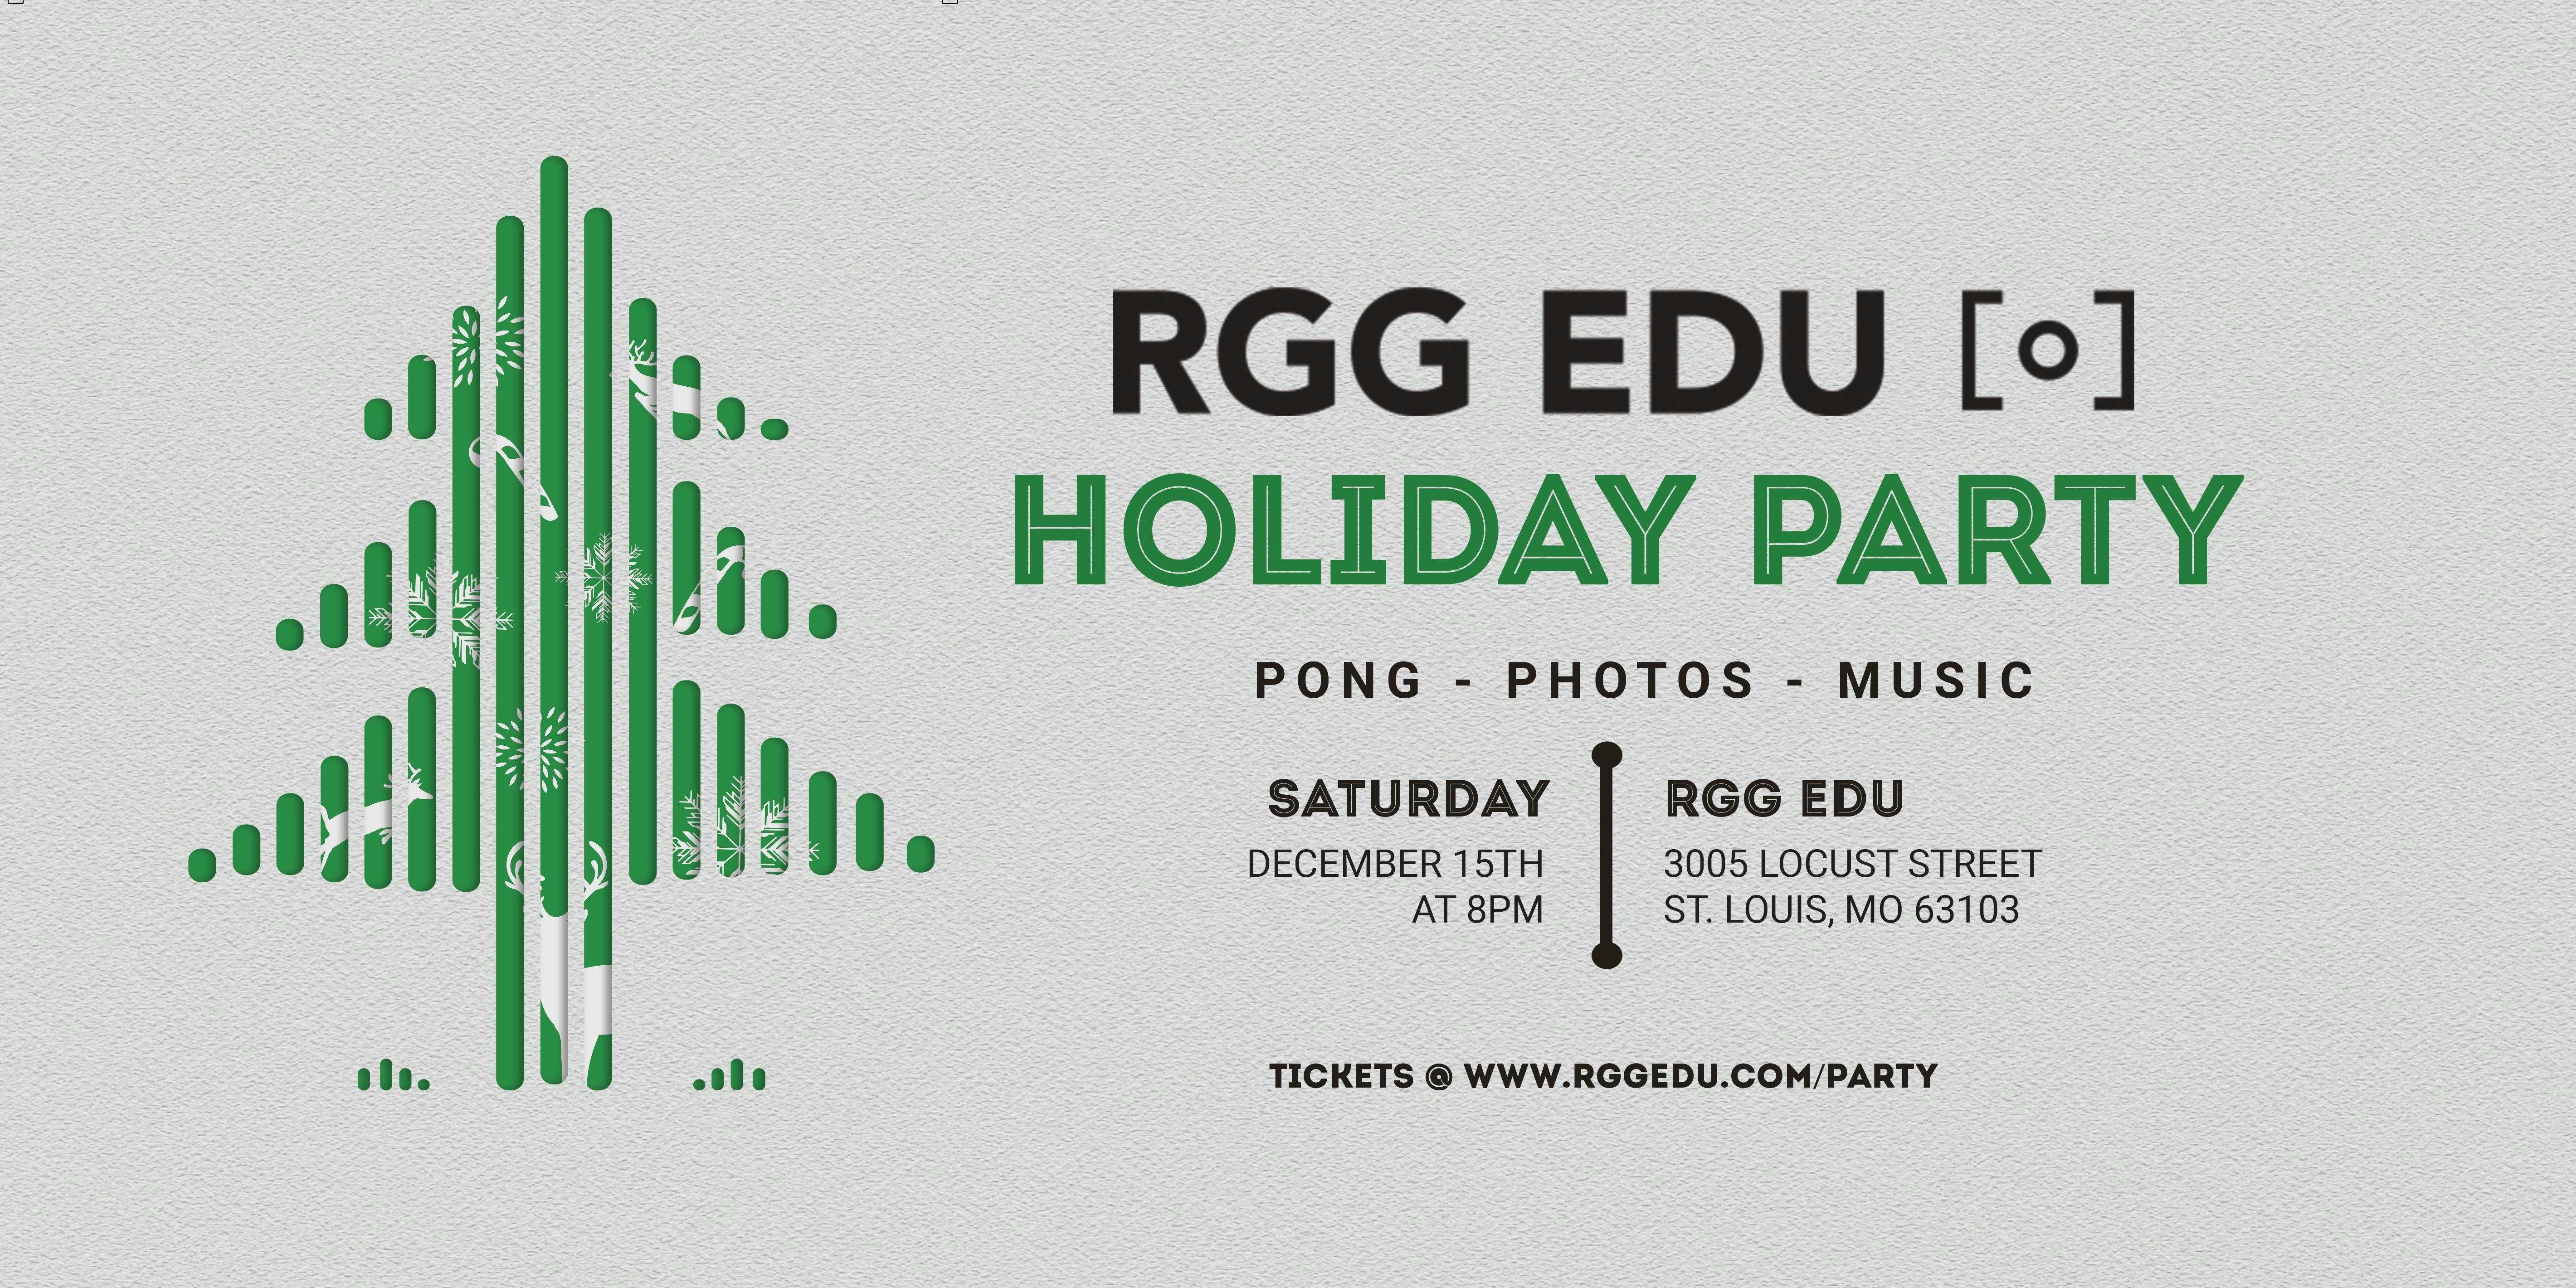 The RGG EDU Holiday Party 2018